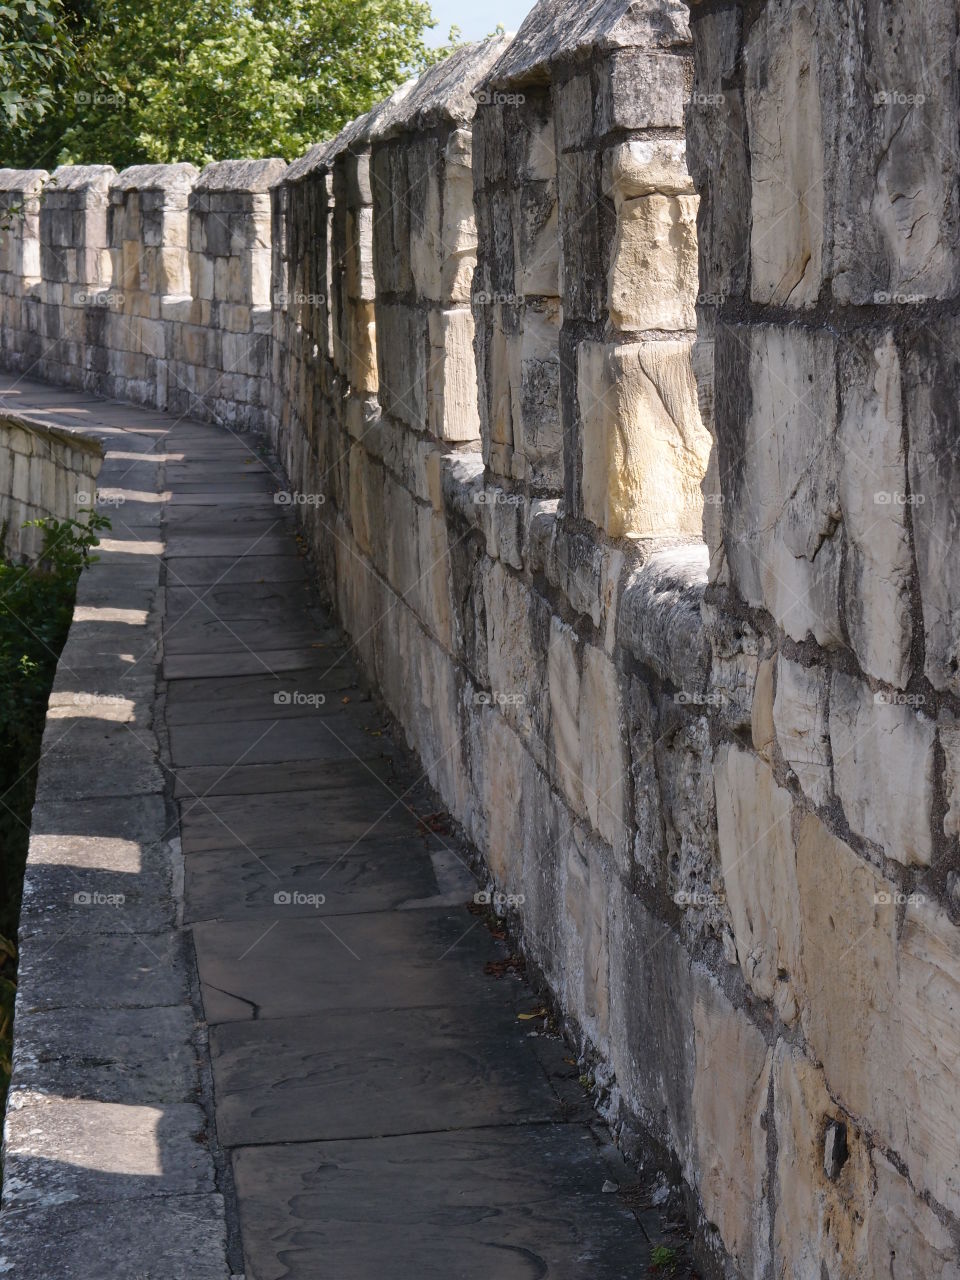 The historic fortified York Wall made of massive stone and a nice walkway surround the older parts of the city. 